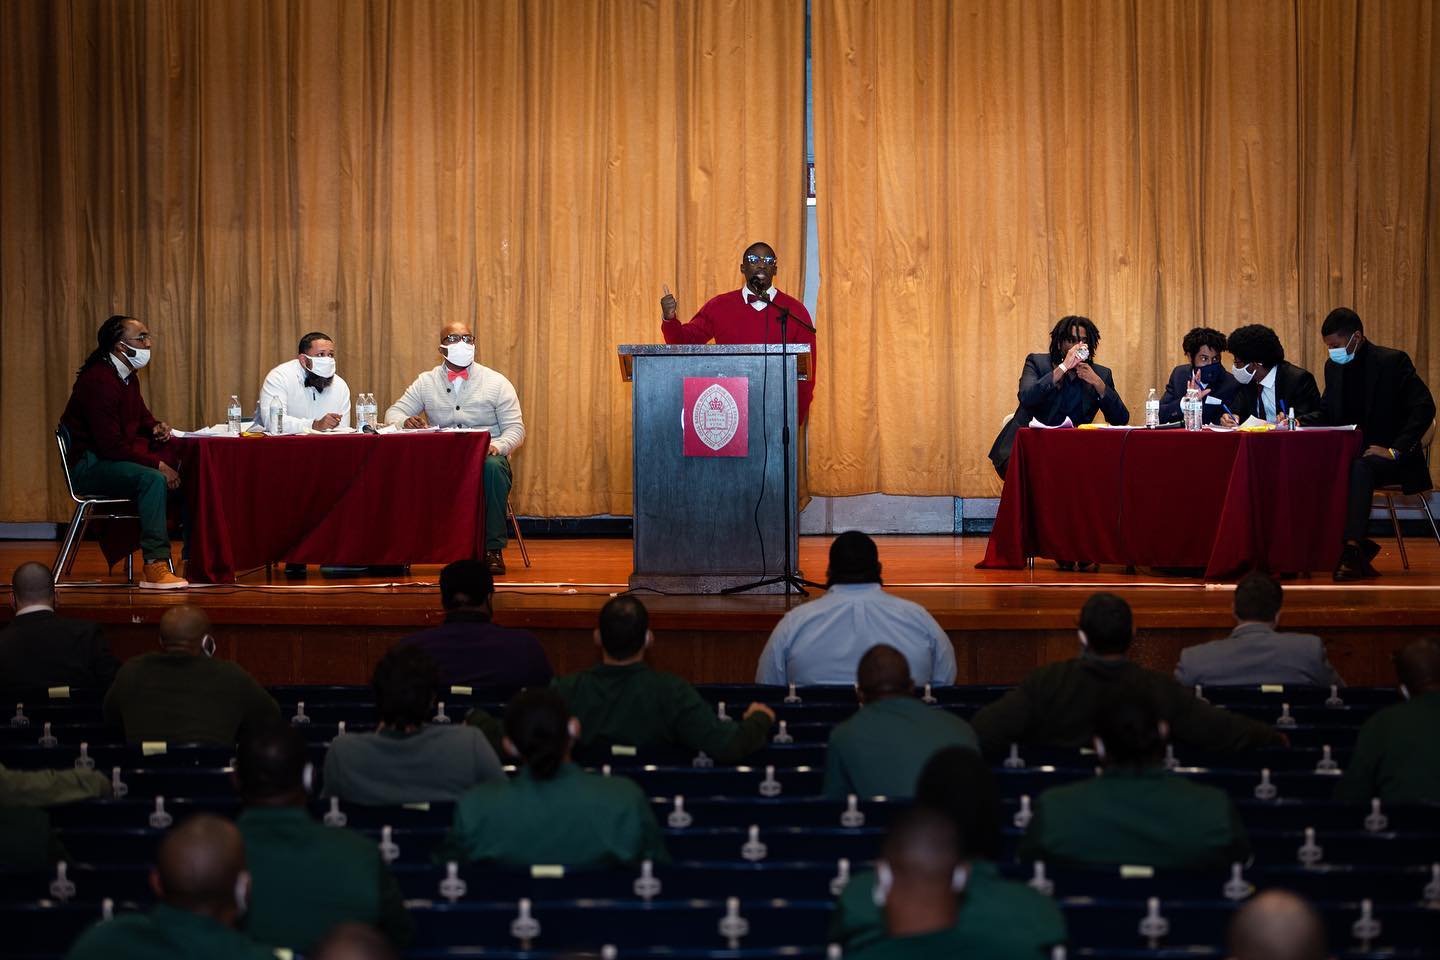 BPI Debate Union Beats Morehouse in First In-Person Debate Since Start of the Pandemic